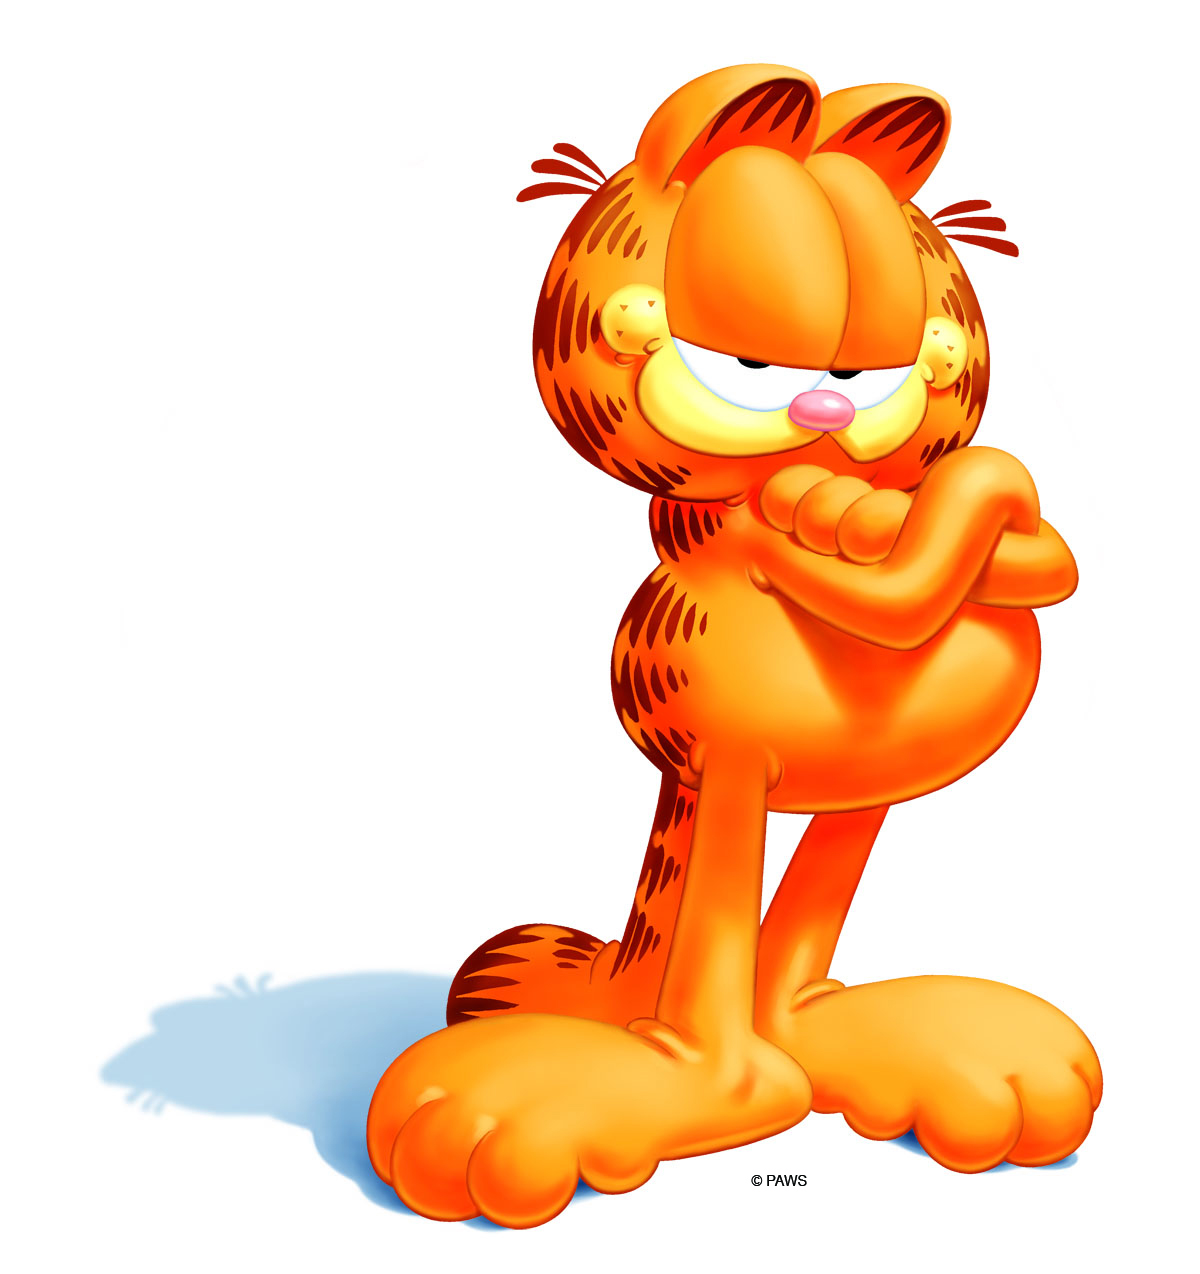 Garfield, the Fat Cat, Then and Now | Grant County Visitors Bureau